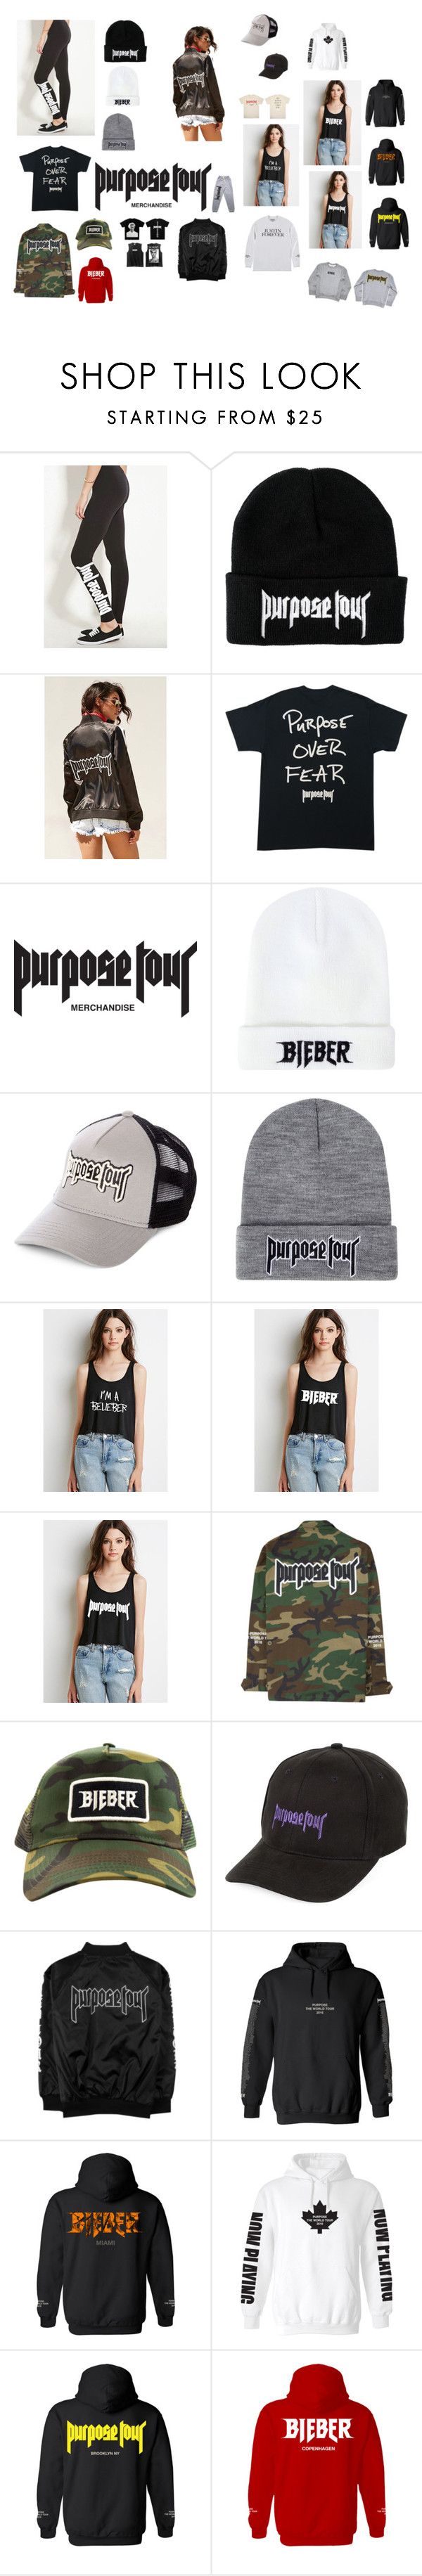 "Purpose tour merch" by princesshannah00 on Polyvore featuring Justin Bieber